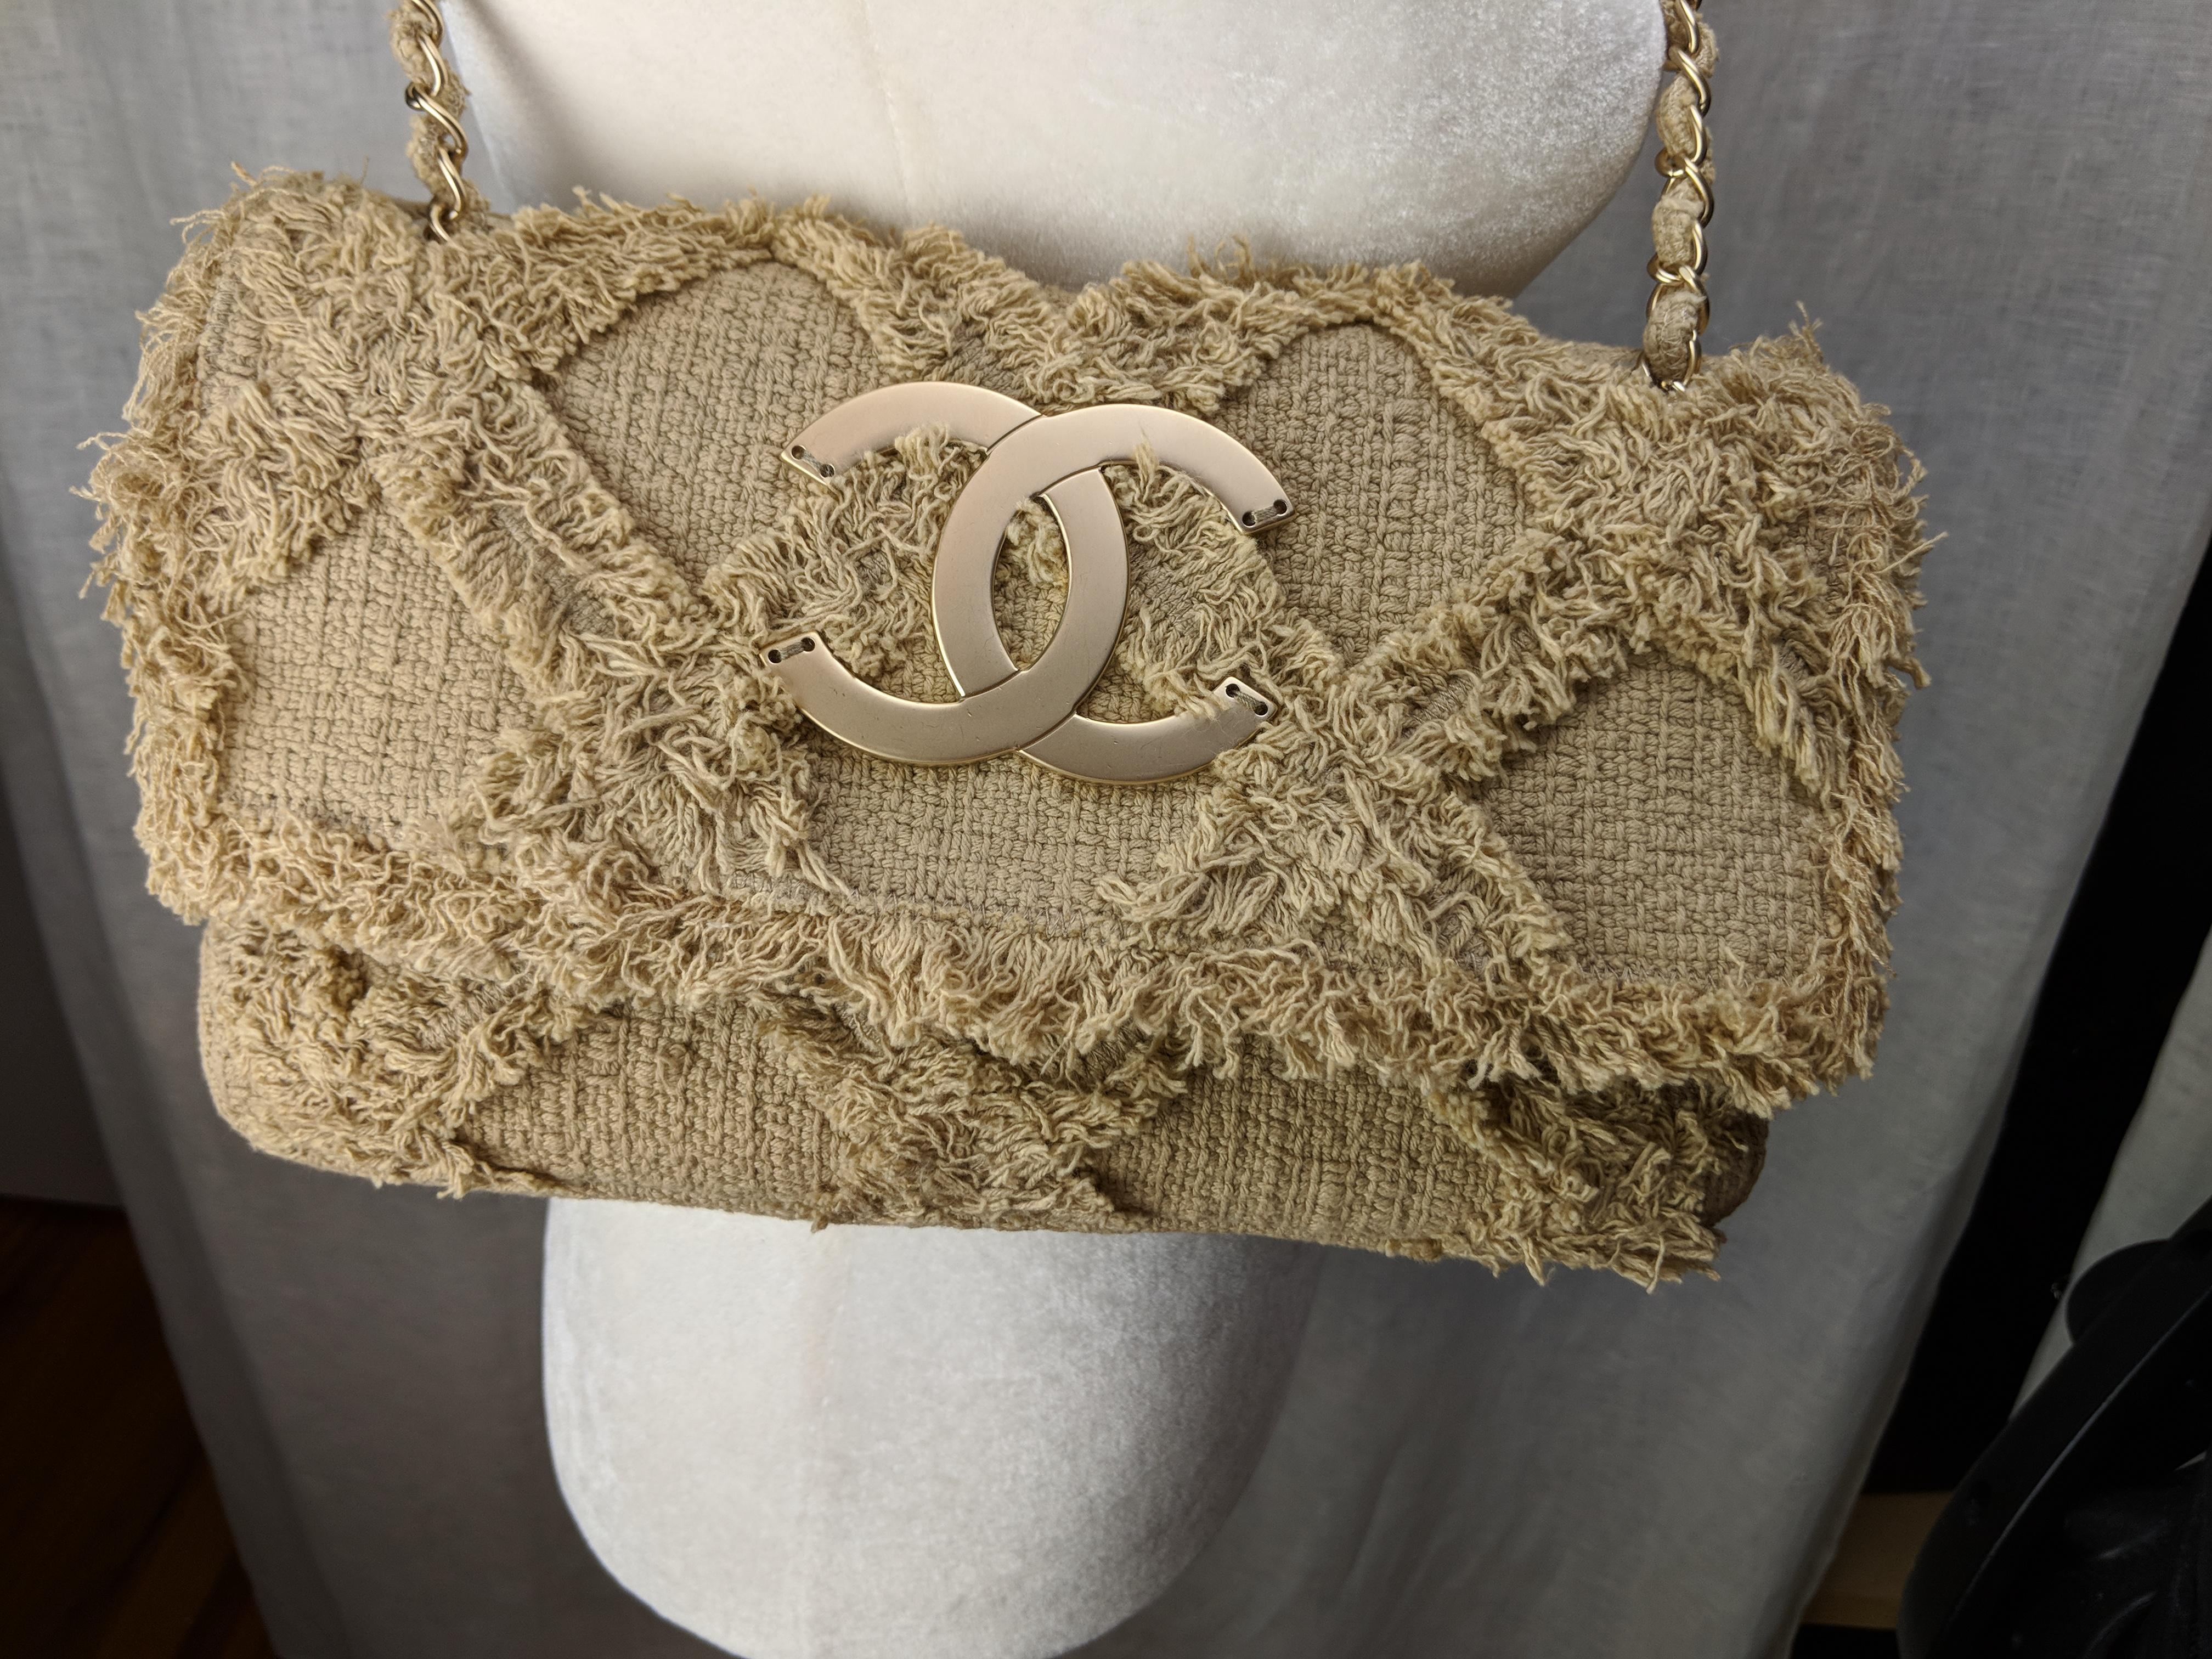 Chanel 2009 Small Sized Beige Tweed Fringe Organic Crochet Nature Flap Bag For Sale 1